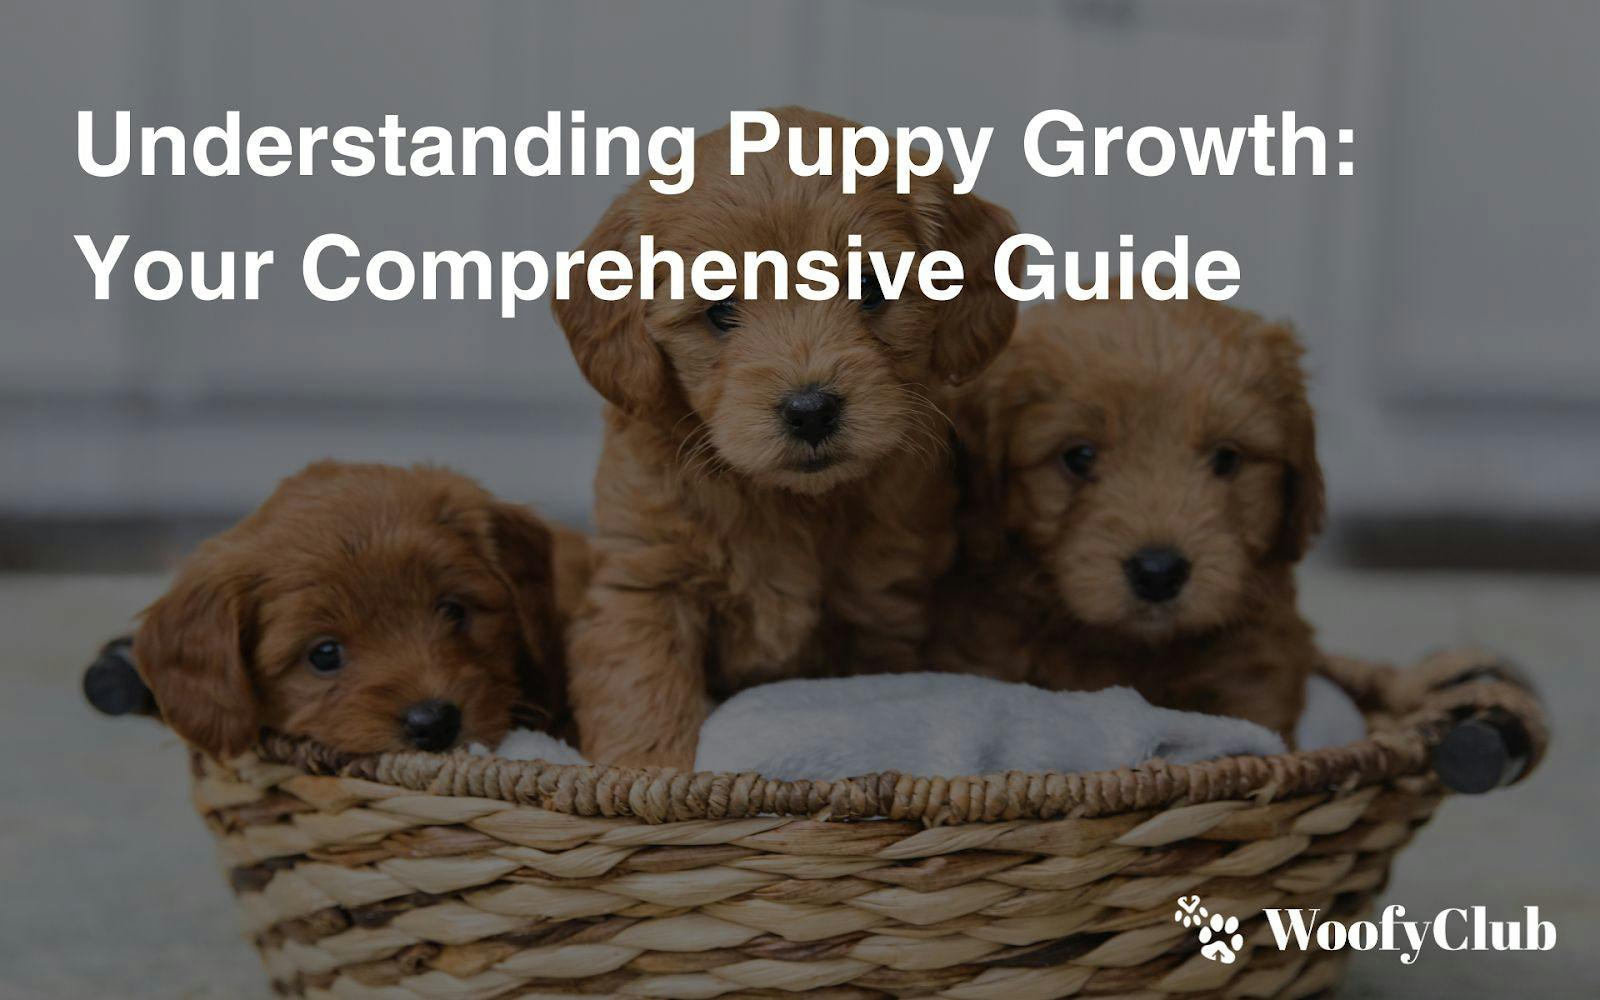 Understanding Puppy Growth: Your Comprehensive Guide